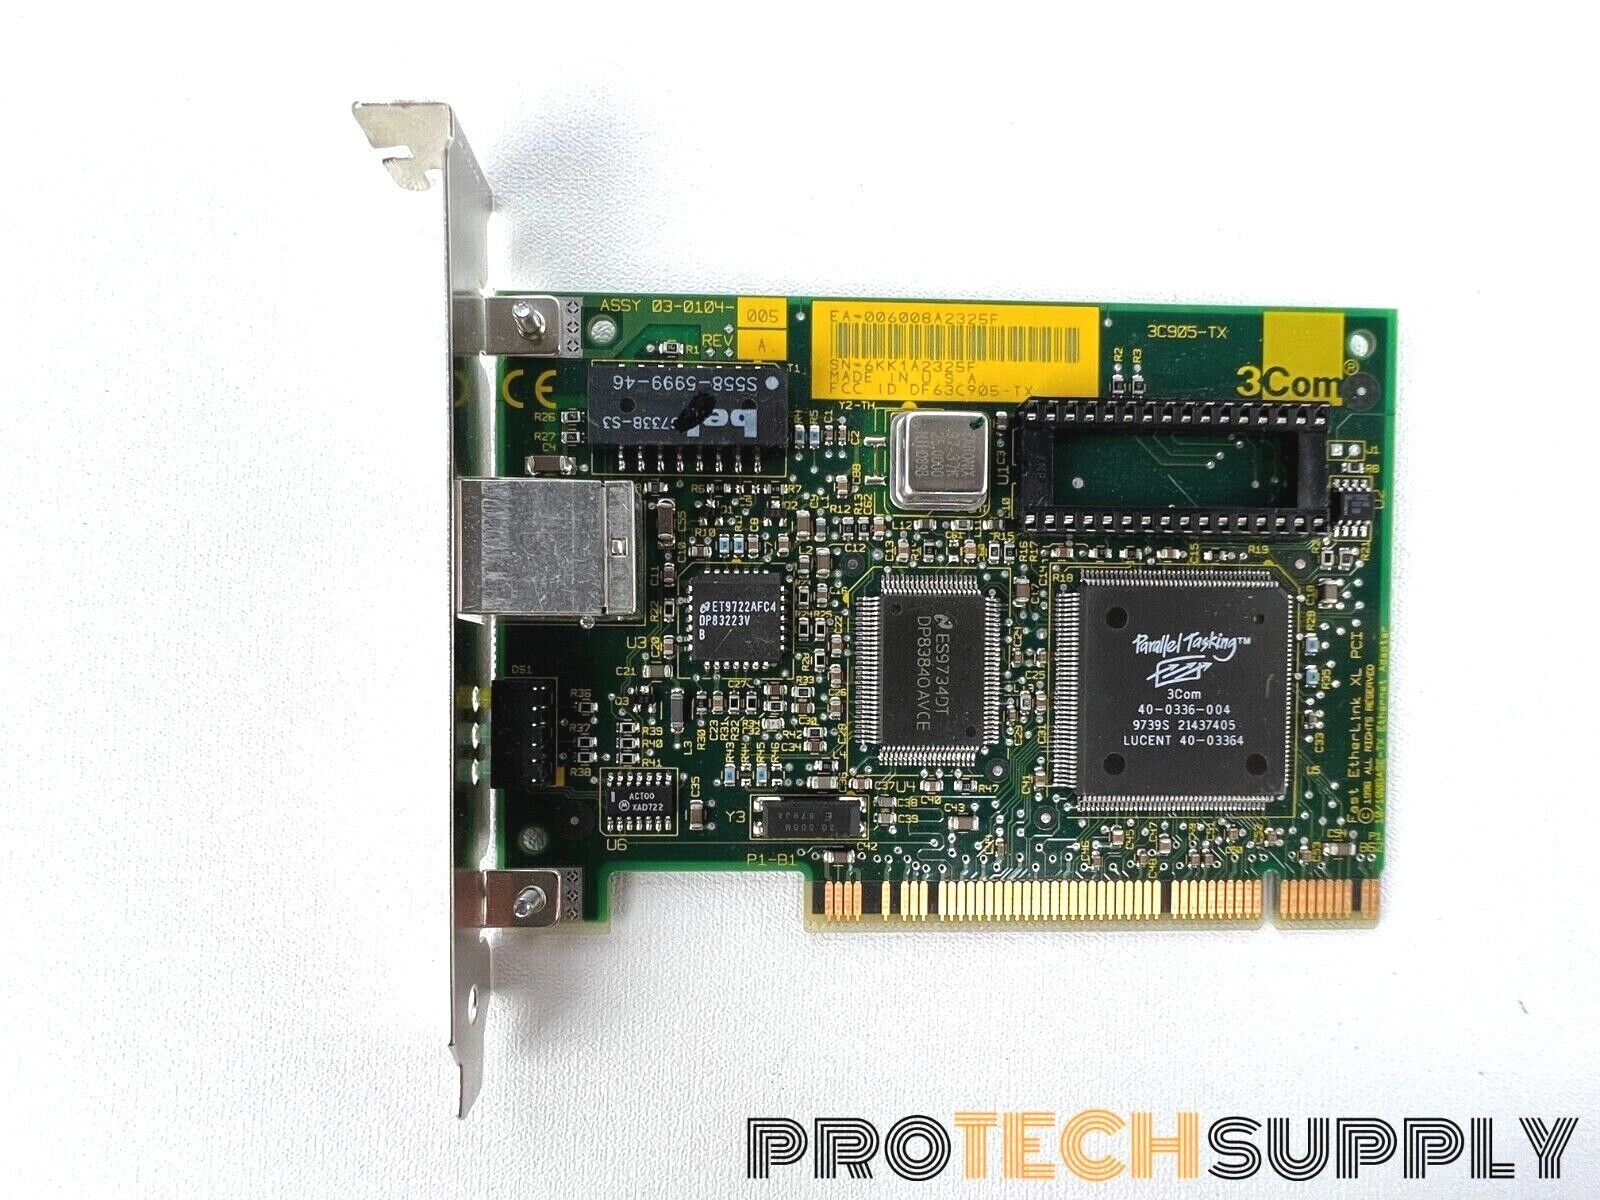 3Com 3C905-TX EtherLink PCI Network Card with WARR